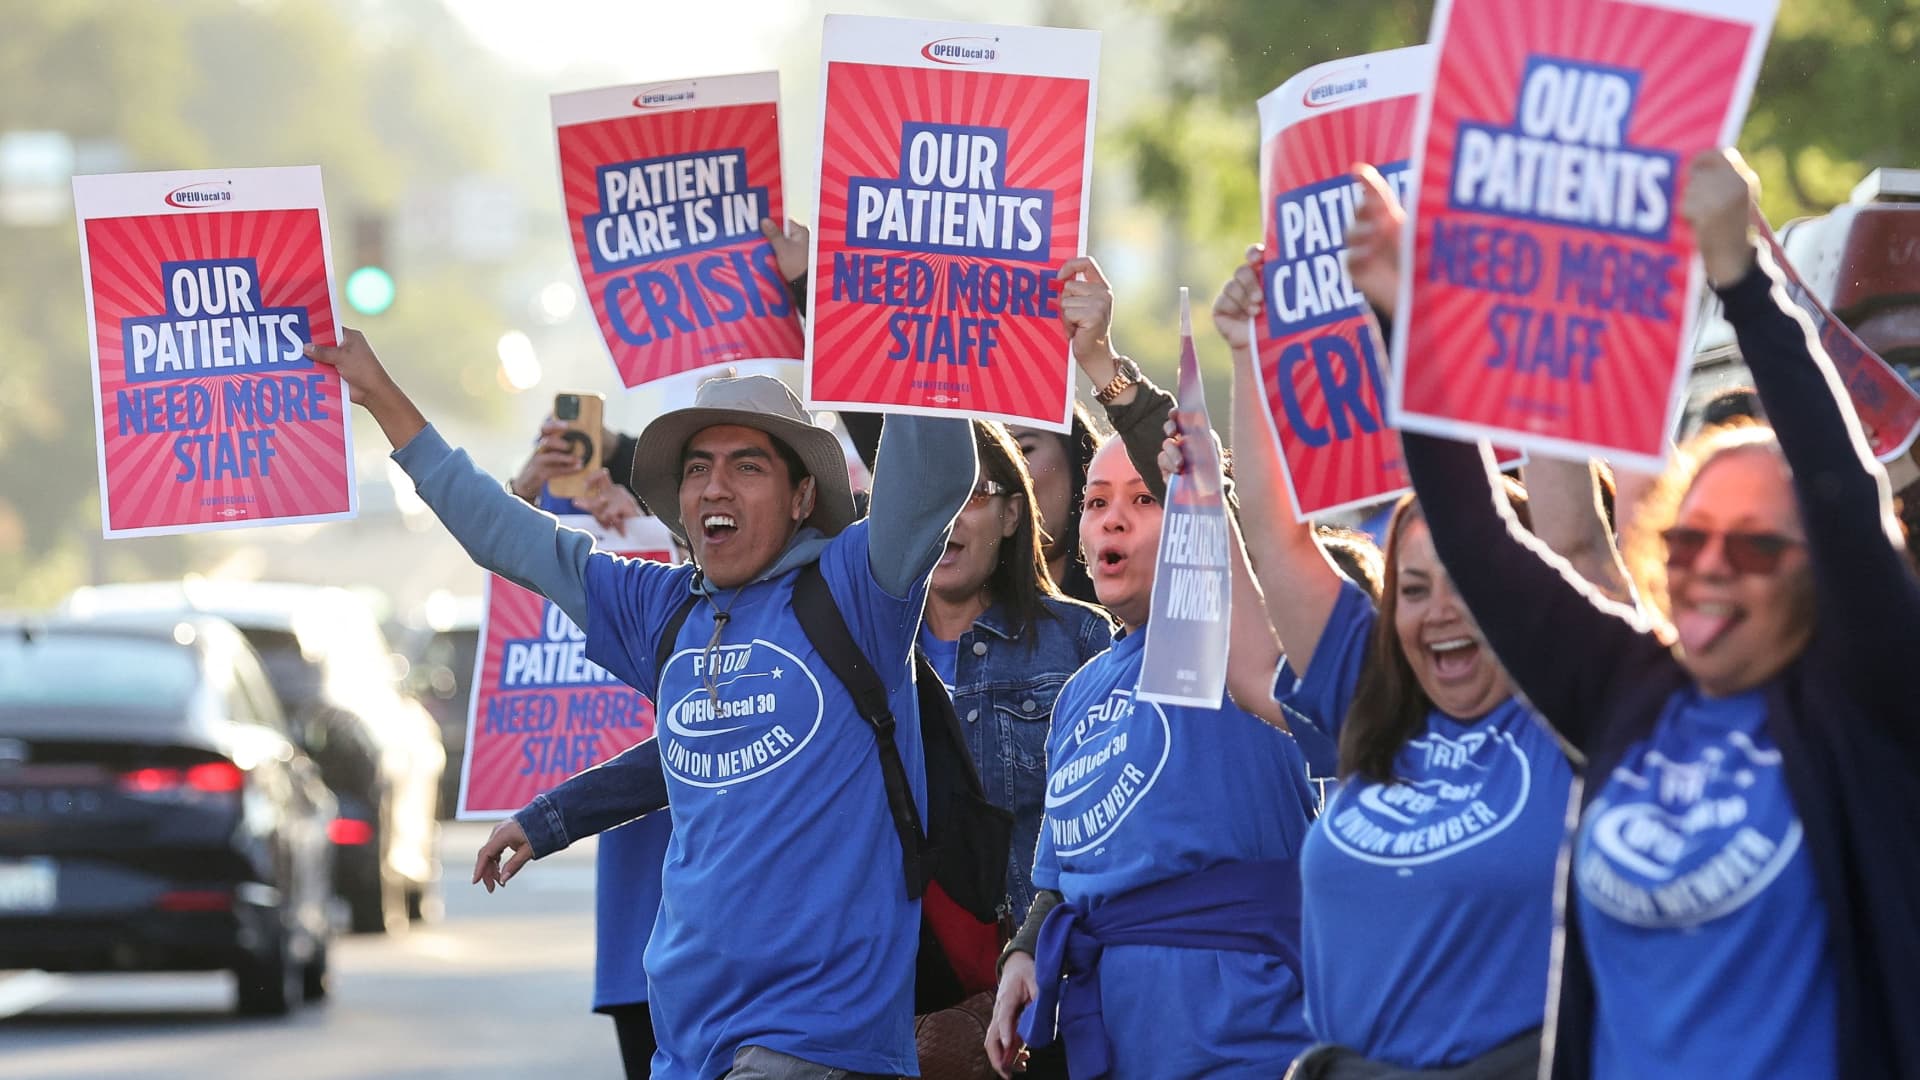 More than 75,000 workers strike at hundreds of Kaiser Permanente health facilities across U.S.